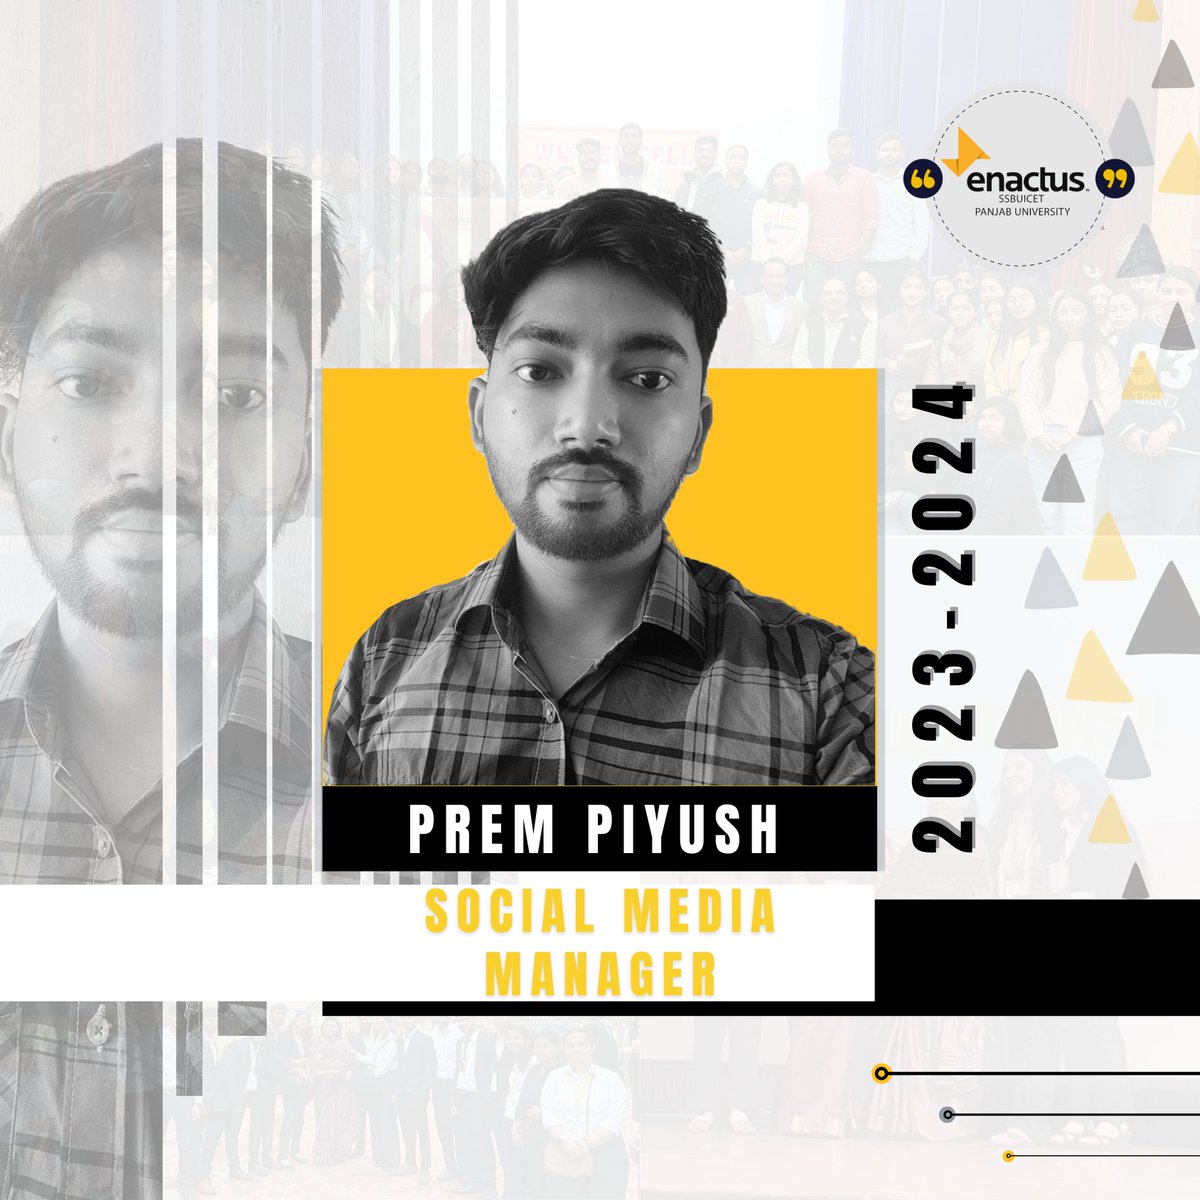 I am grateful to get this opportunity. I feel confident that my skills and experience take me to this peak. I am eager to utilize my expertise.
-Signing In
Prem Piyush
Social Media Manager
Enactus SSBUICET
Panjab University
#newcabinet